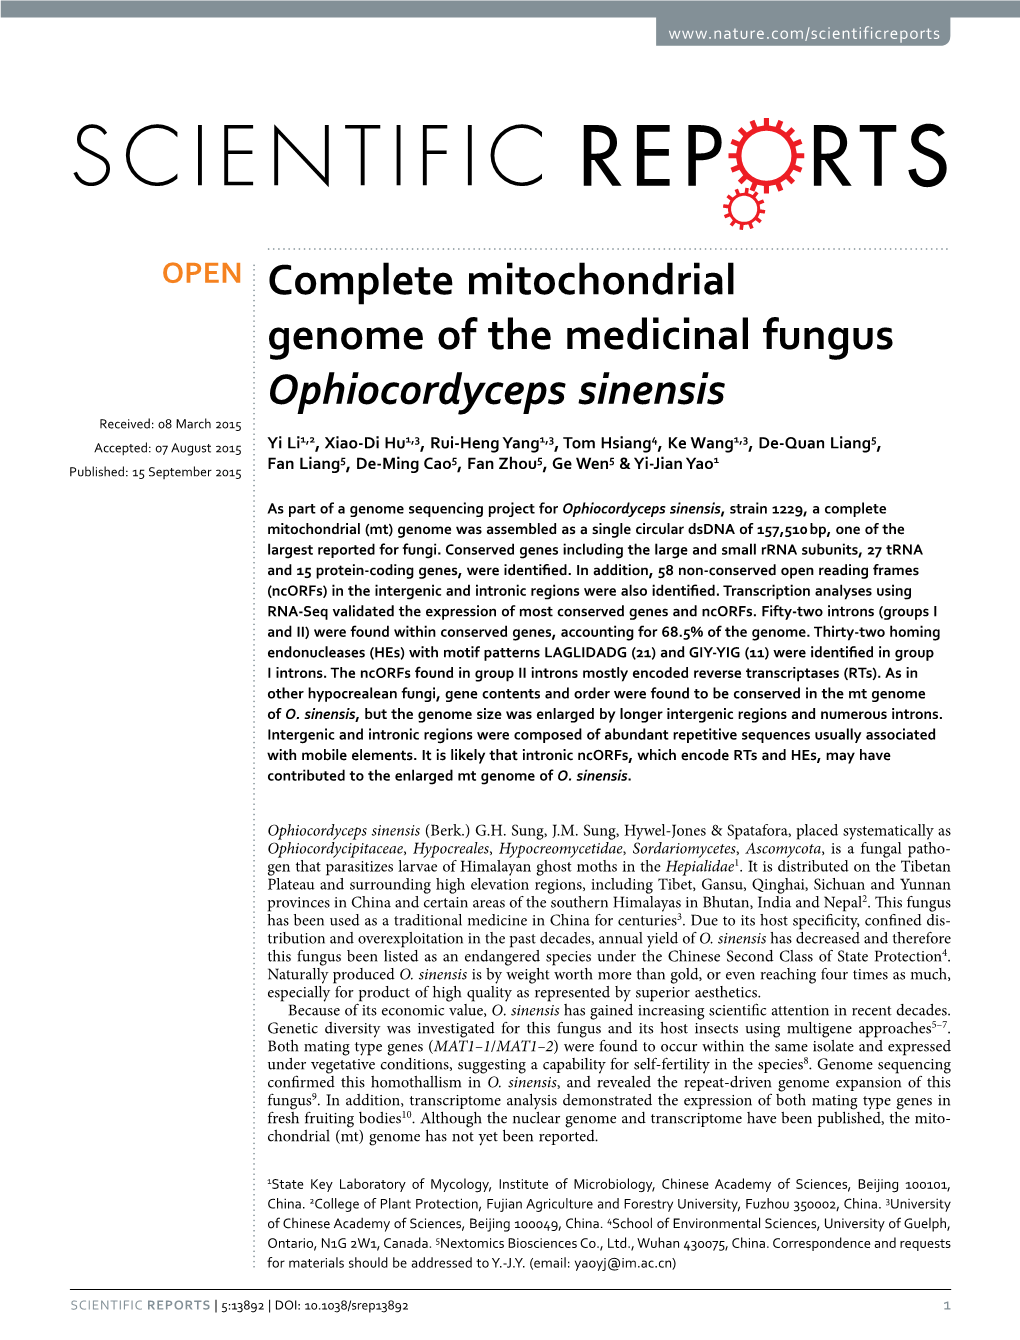 Complete Mitochondrial Genome of the Medicinal Fungus